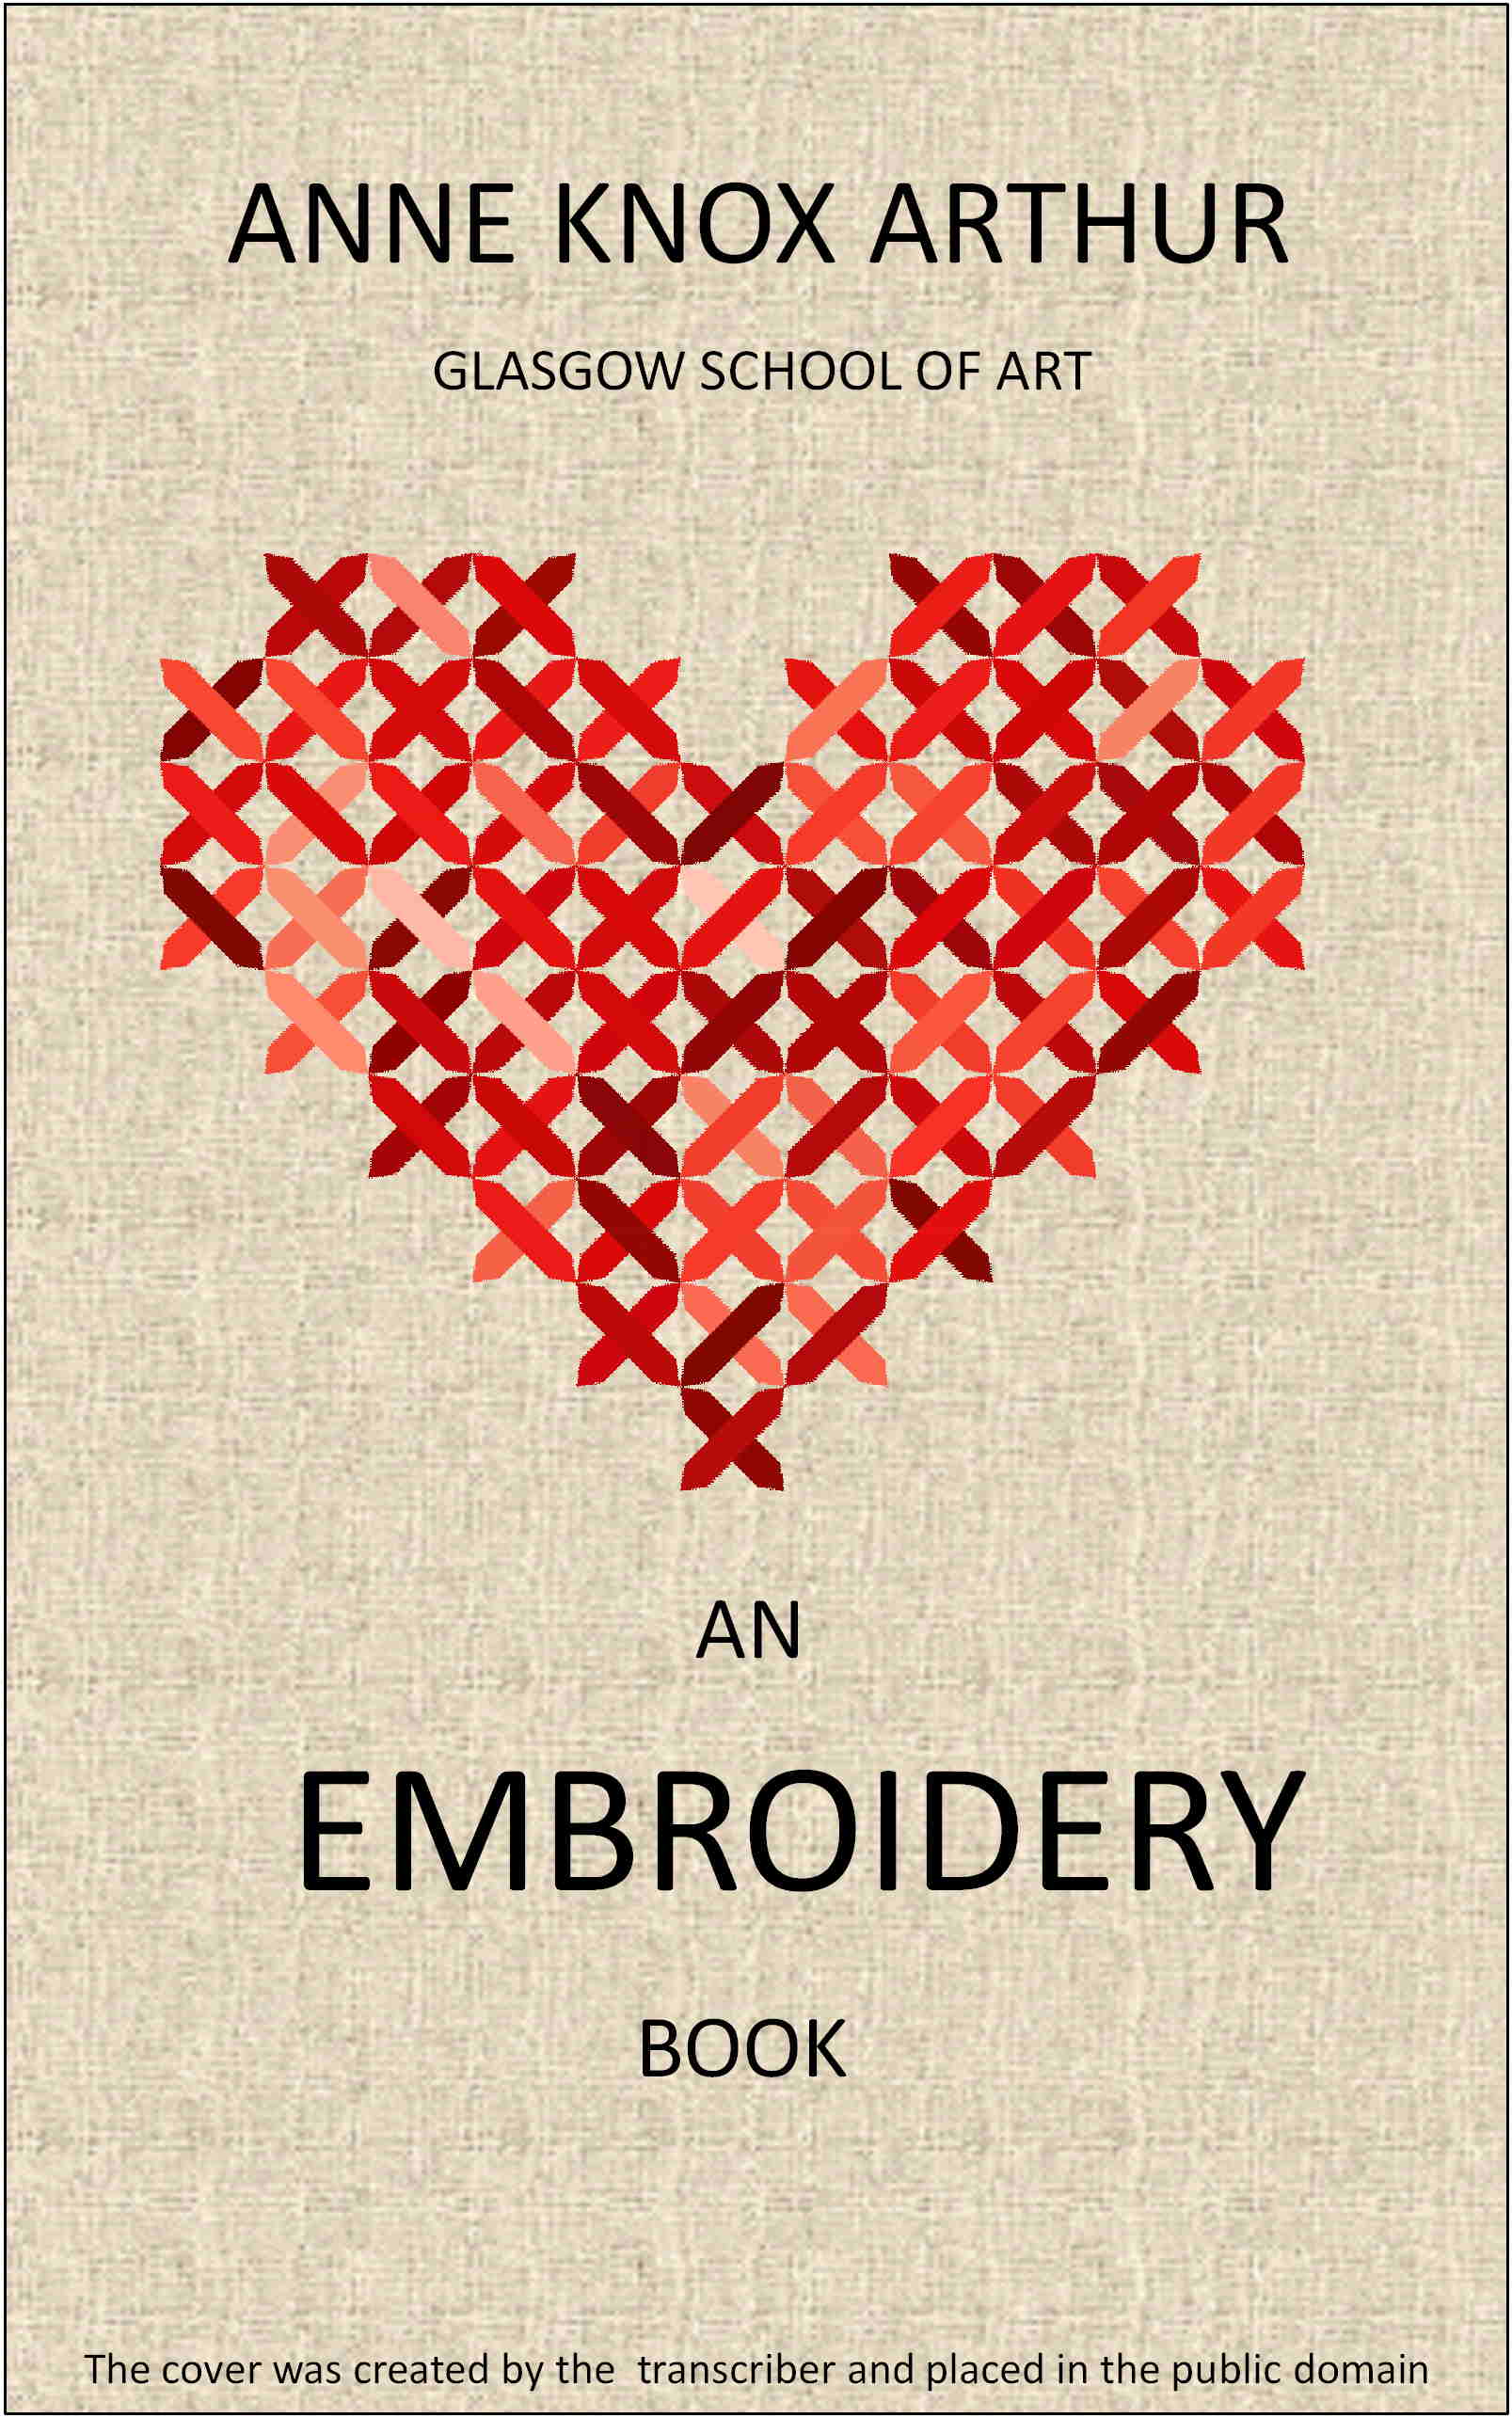 An Embroidery Book, by Anne Knox Arthur—A Project Gutenberg eBook